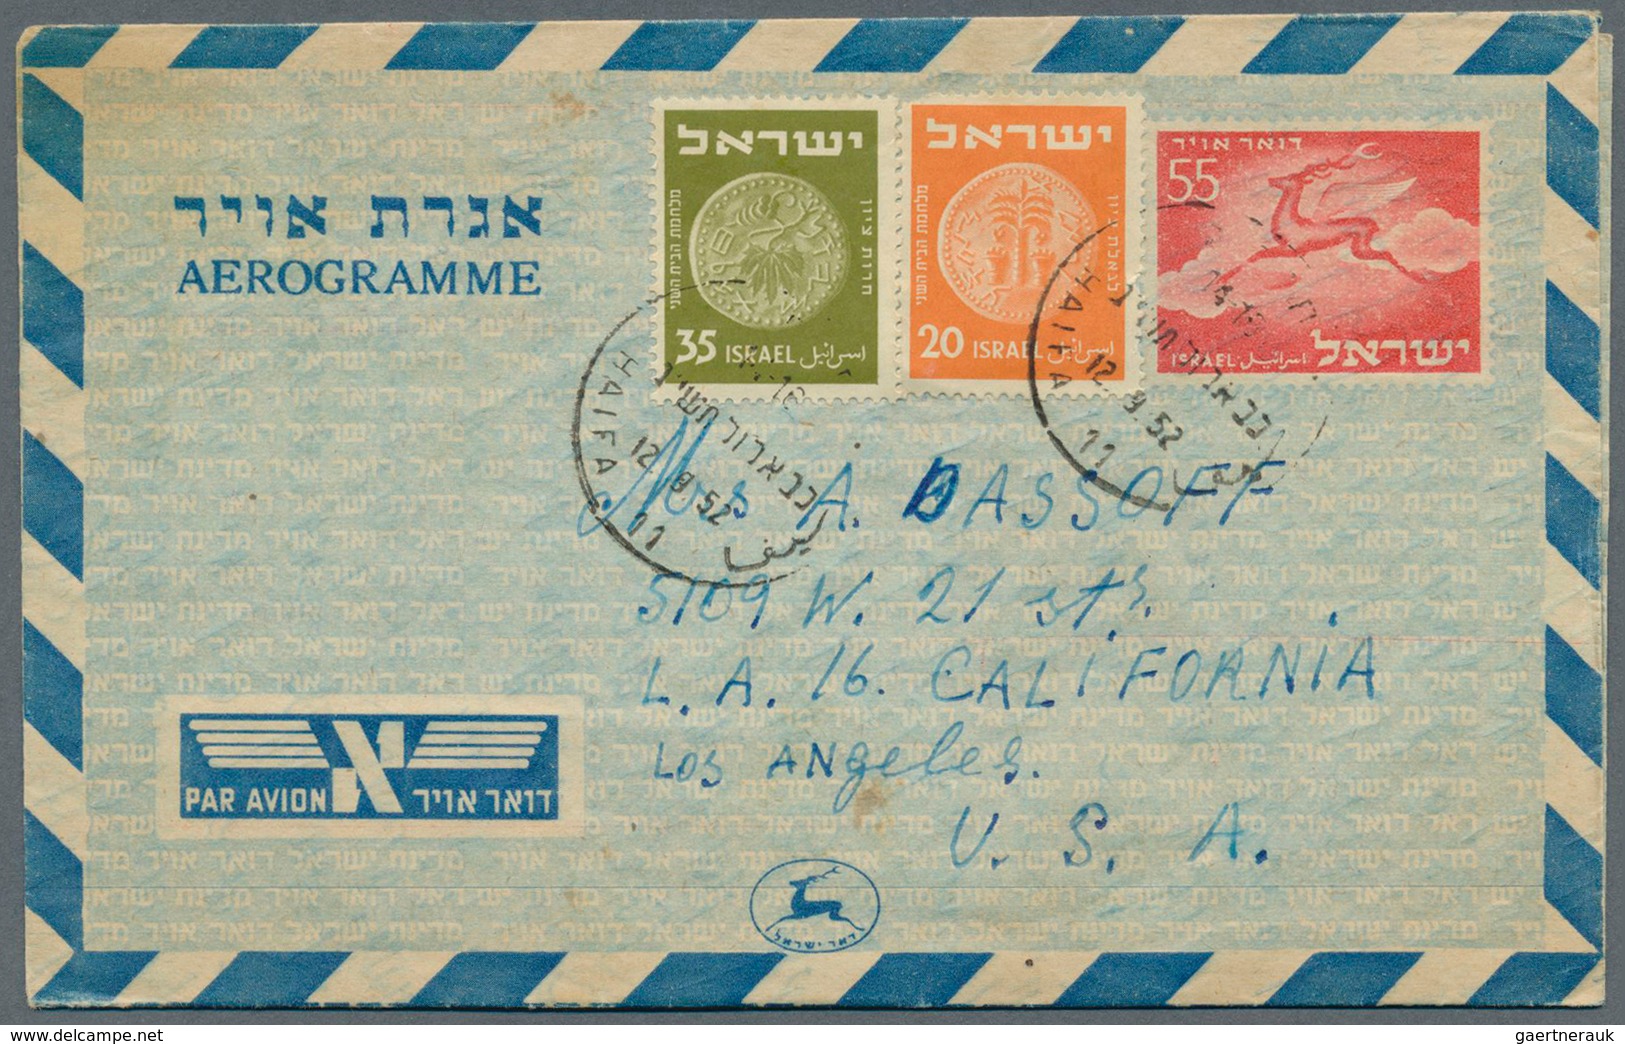 Israel: 1951/1990 (ca.), AEROGRAMMES: accumulation with about 650 commercially used aerogrammes with